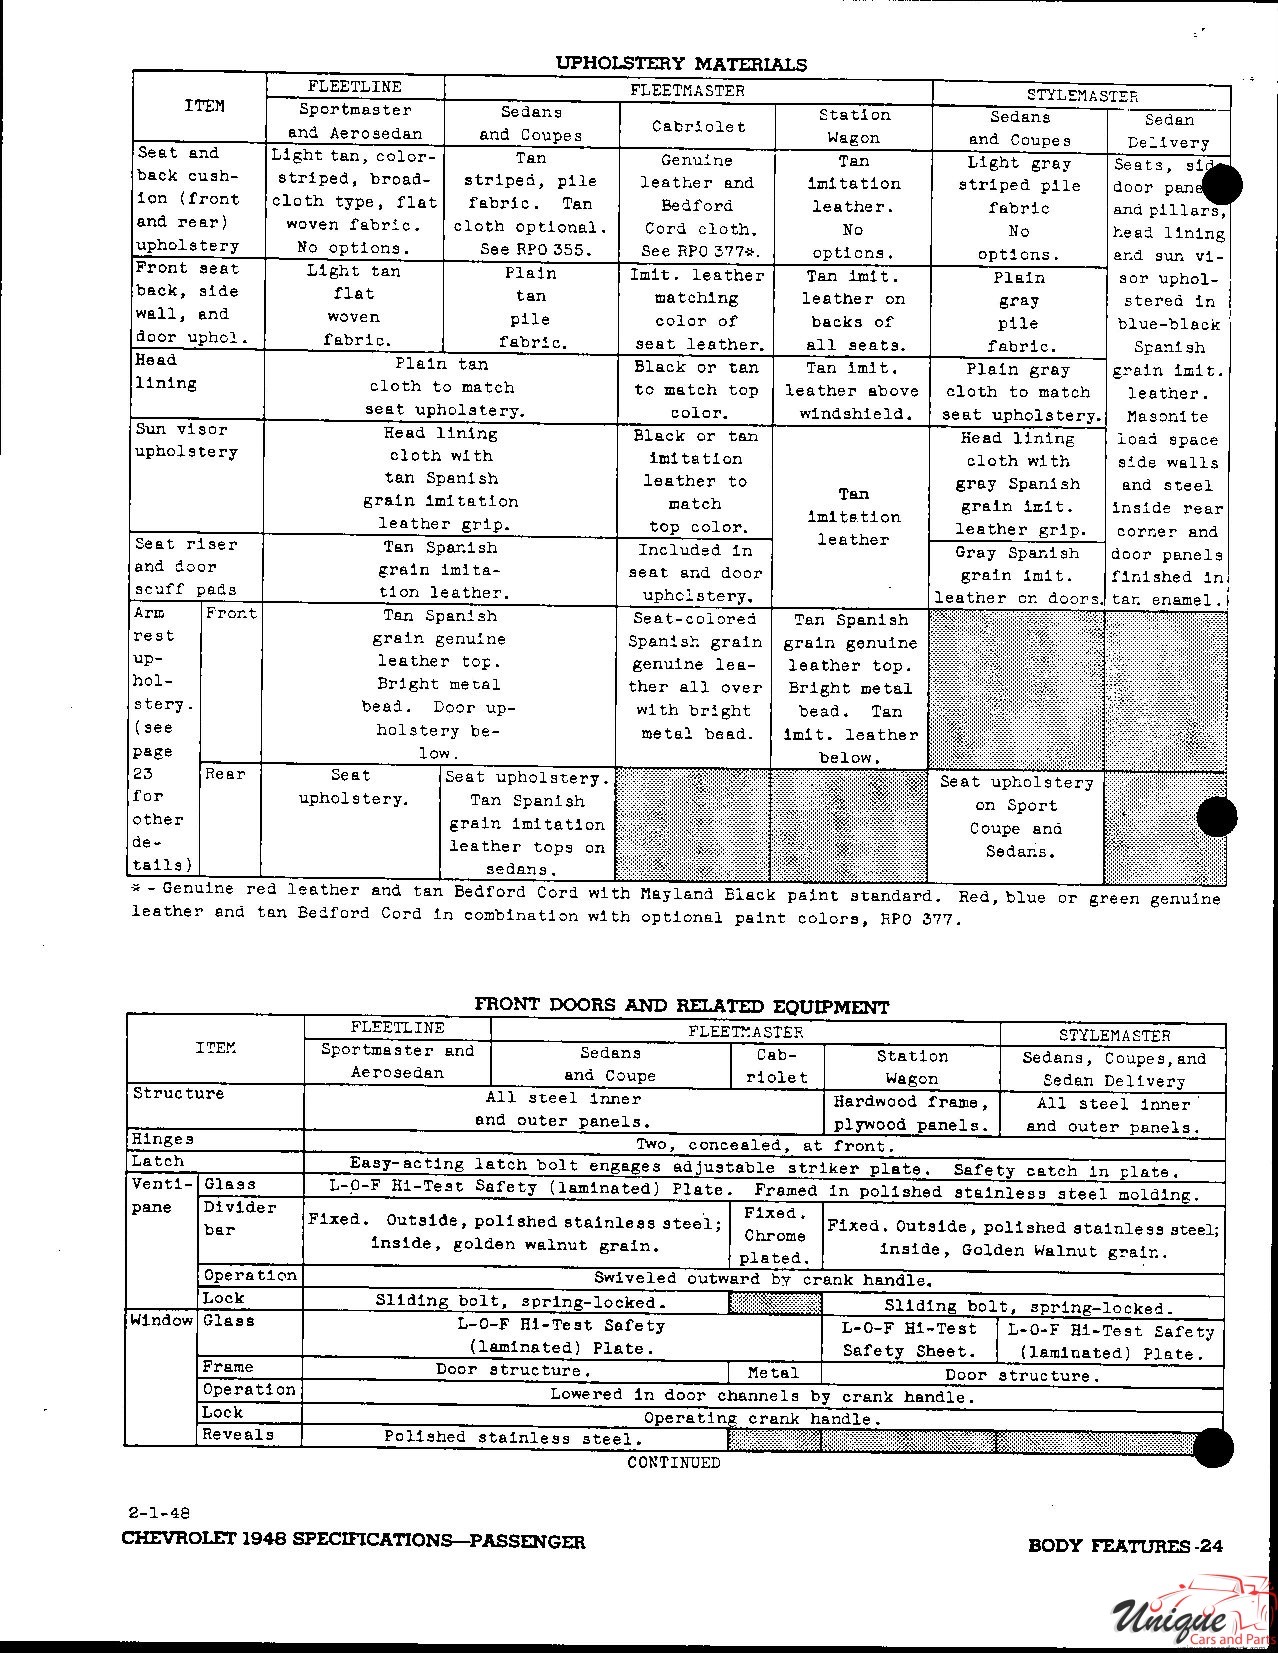 1948 Chevrolet Specifications Page 24